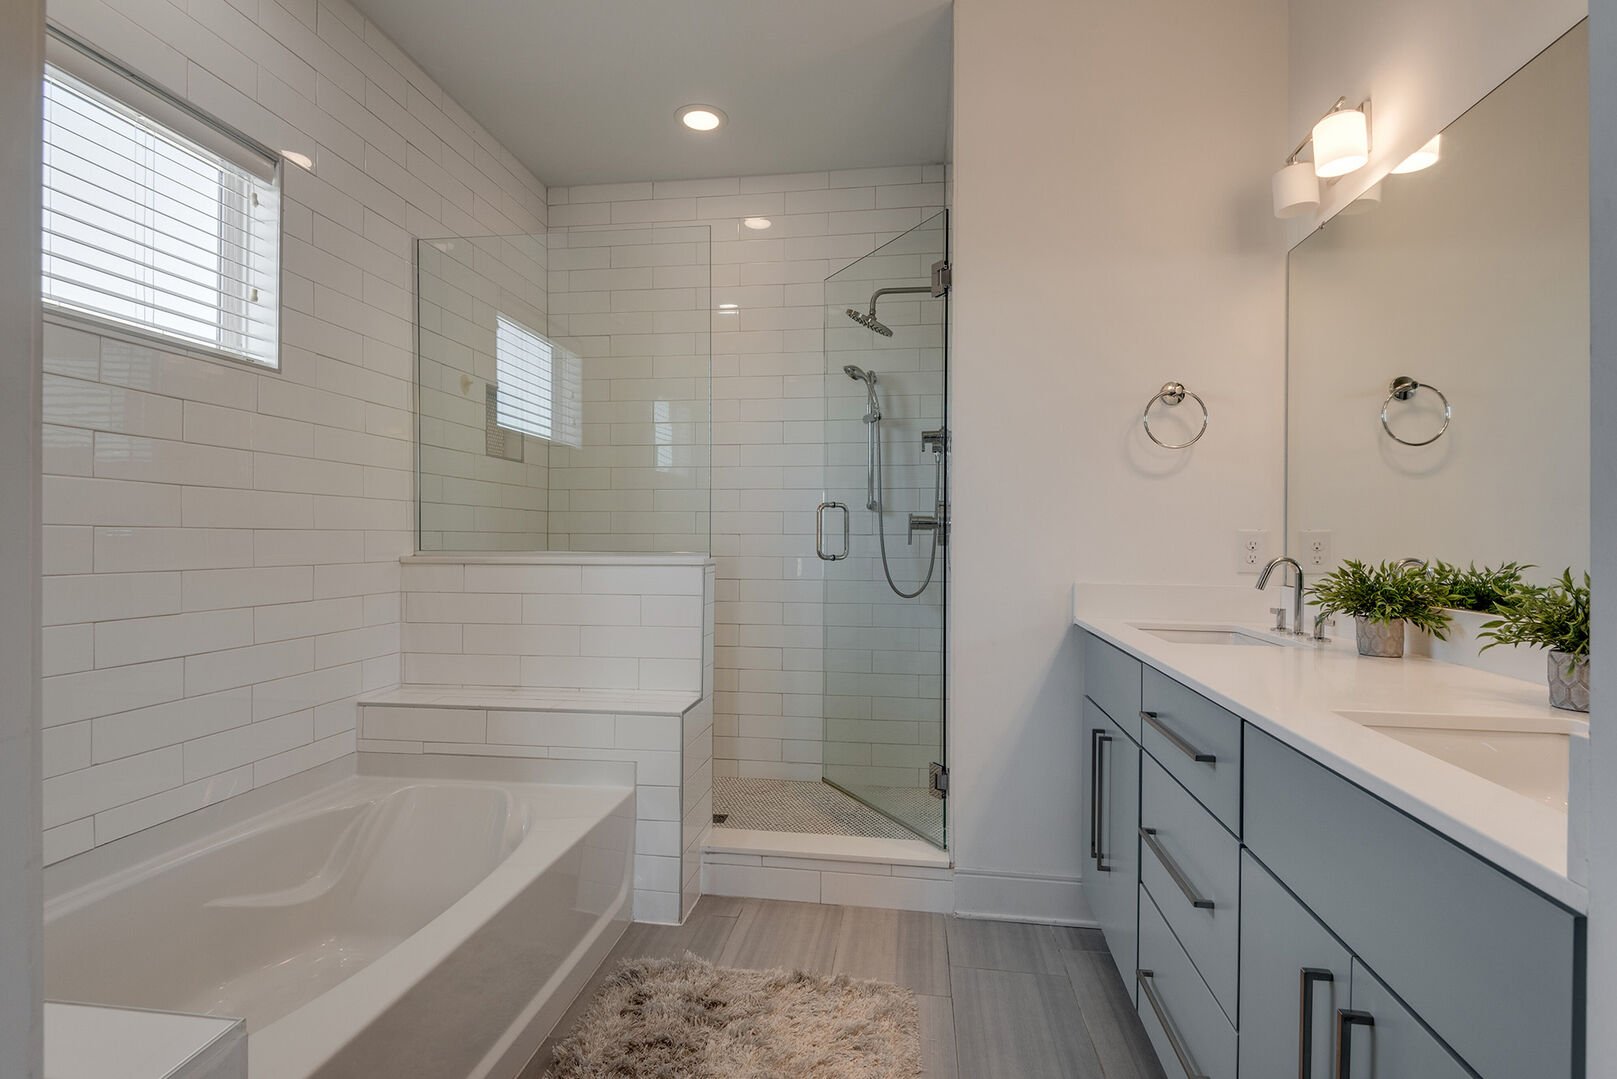 Master bathroom with double sink vanity, walk in closet, soaker tub and separate shower